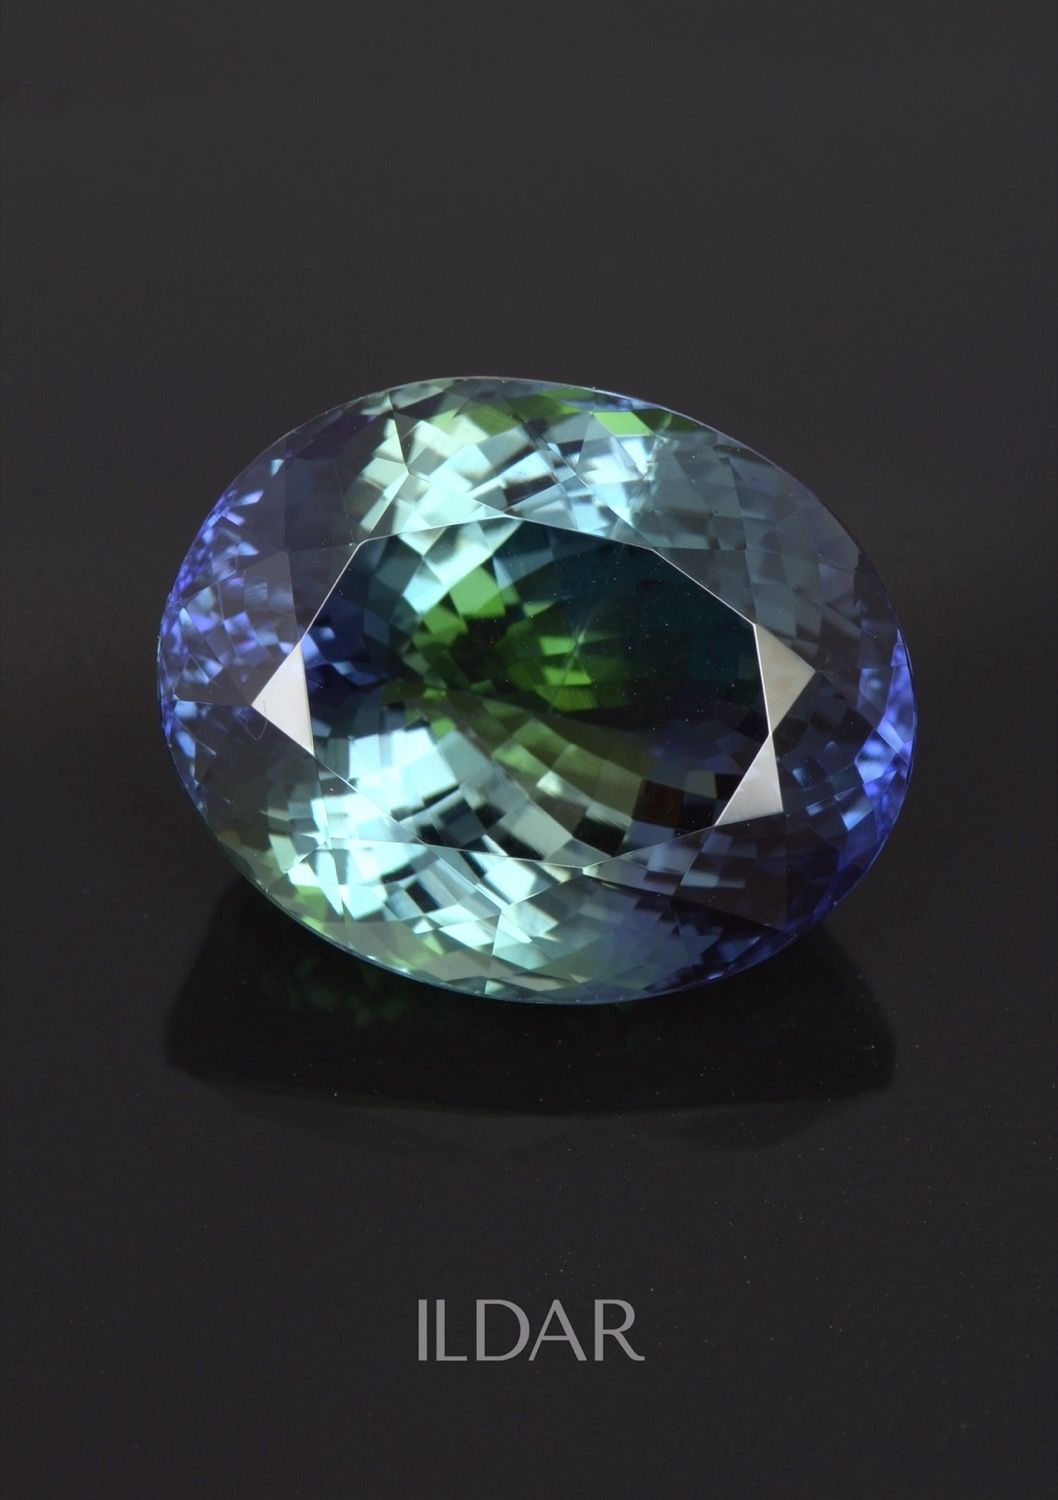 Green tanzanite gems by ILDAR. Tanzanite is the blue and